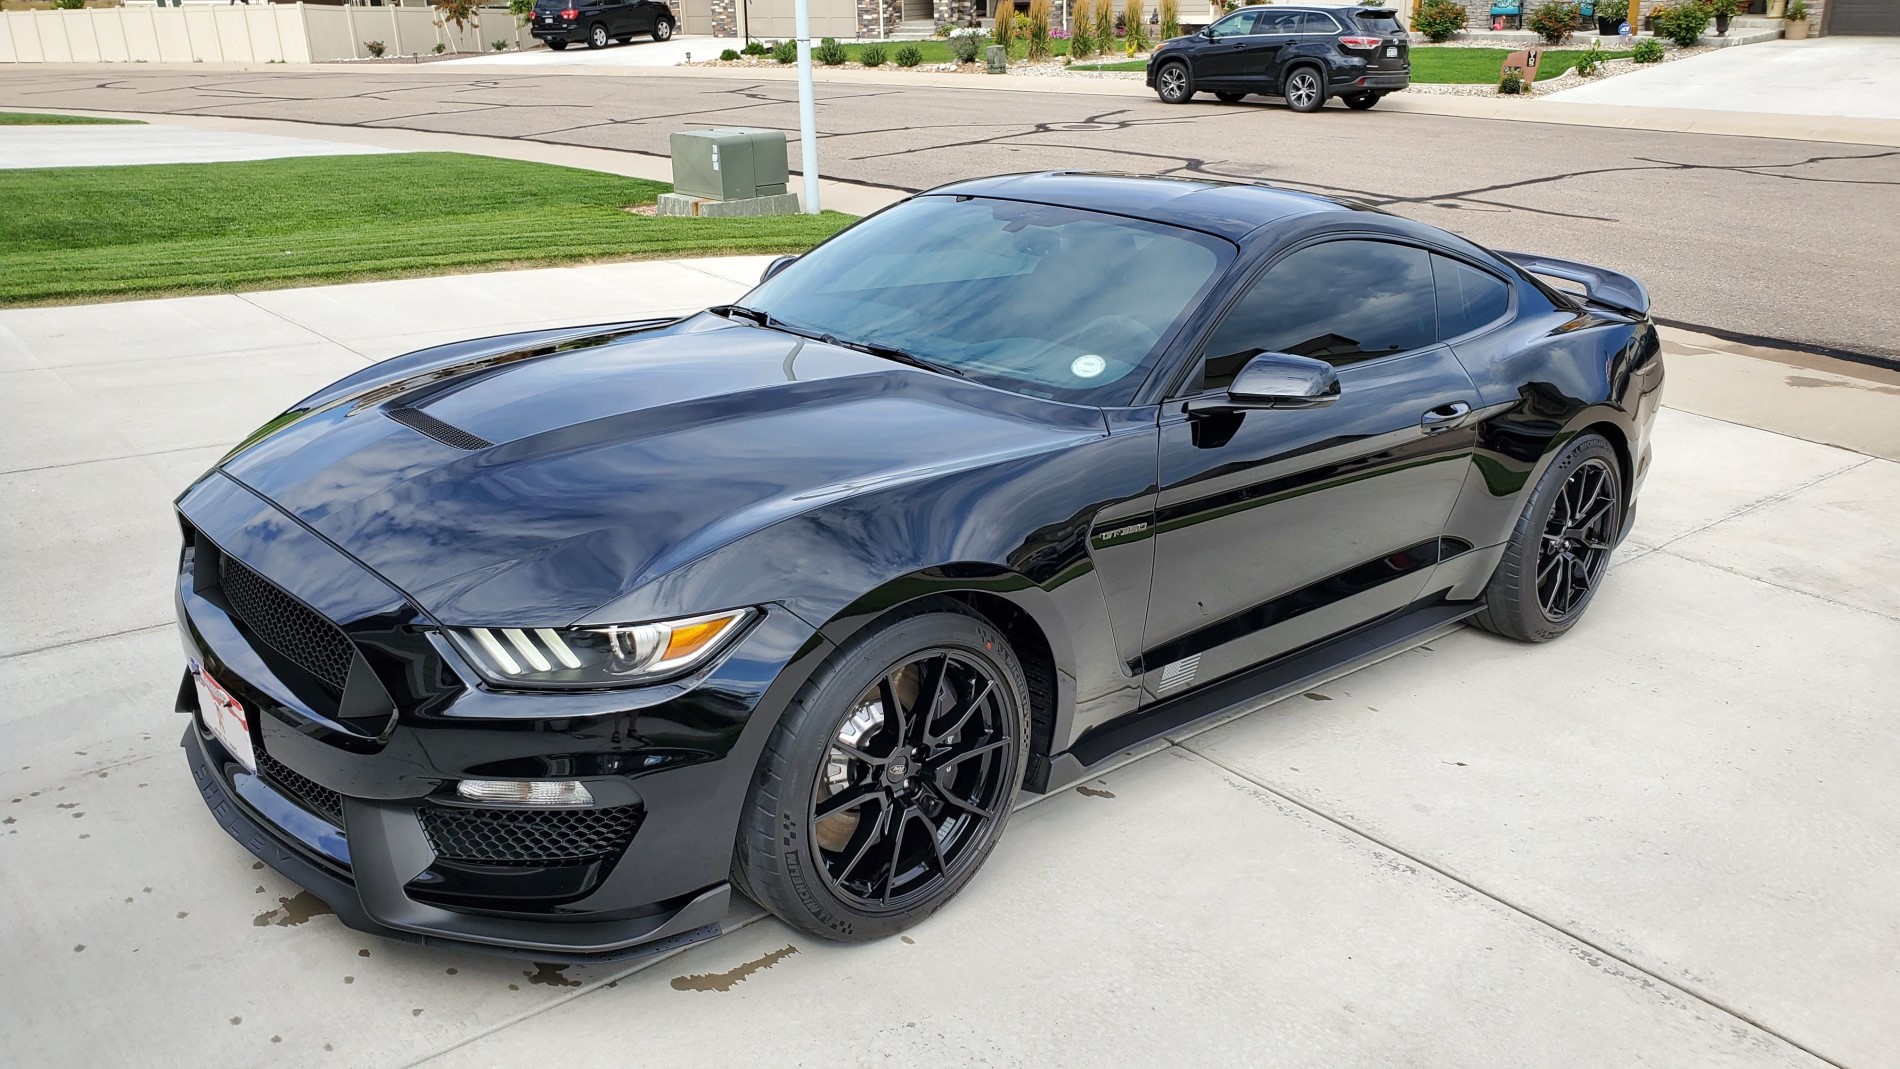 S650 Mustang image test 2019_Shelby_GT350_2_fixed_web